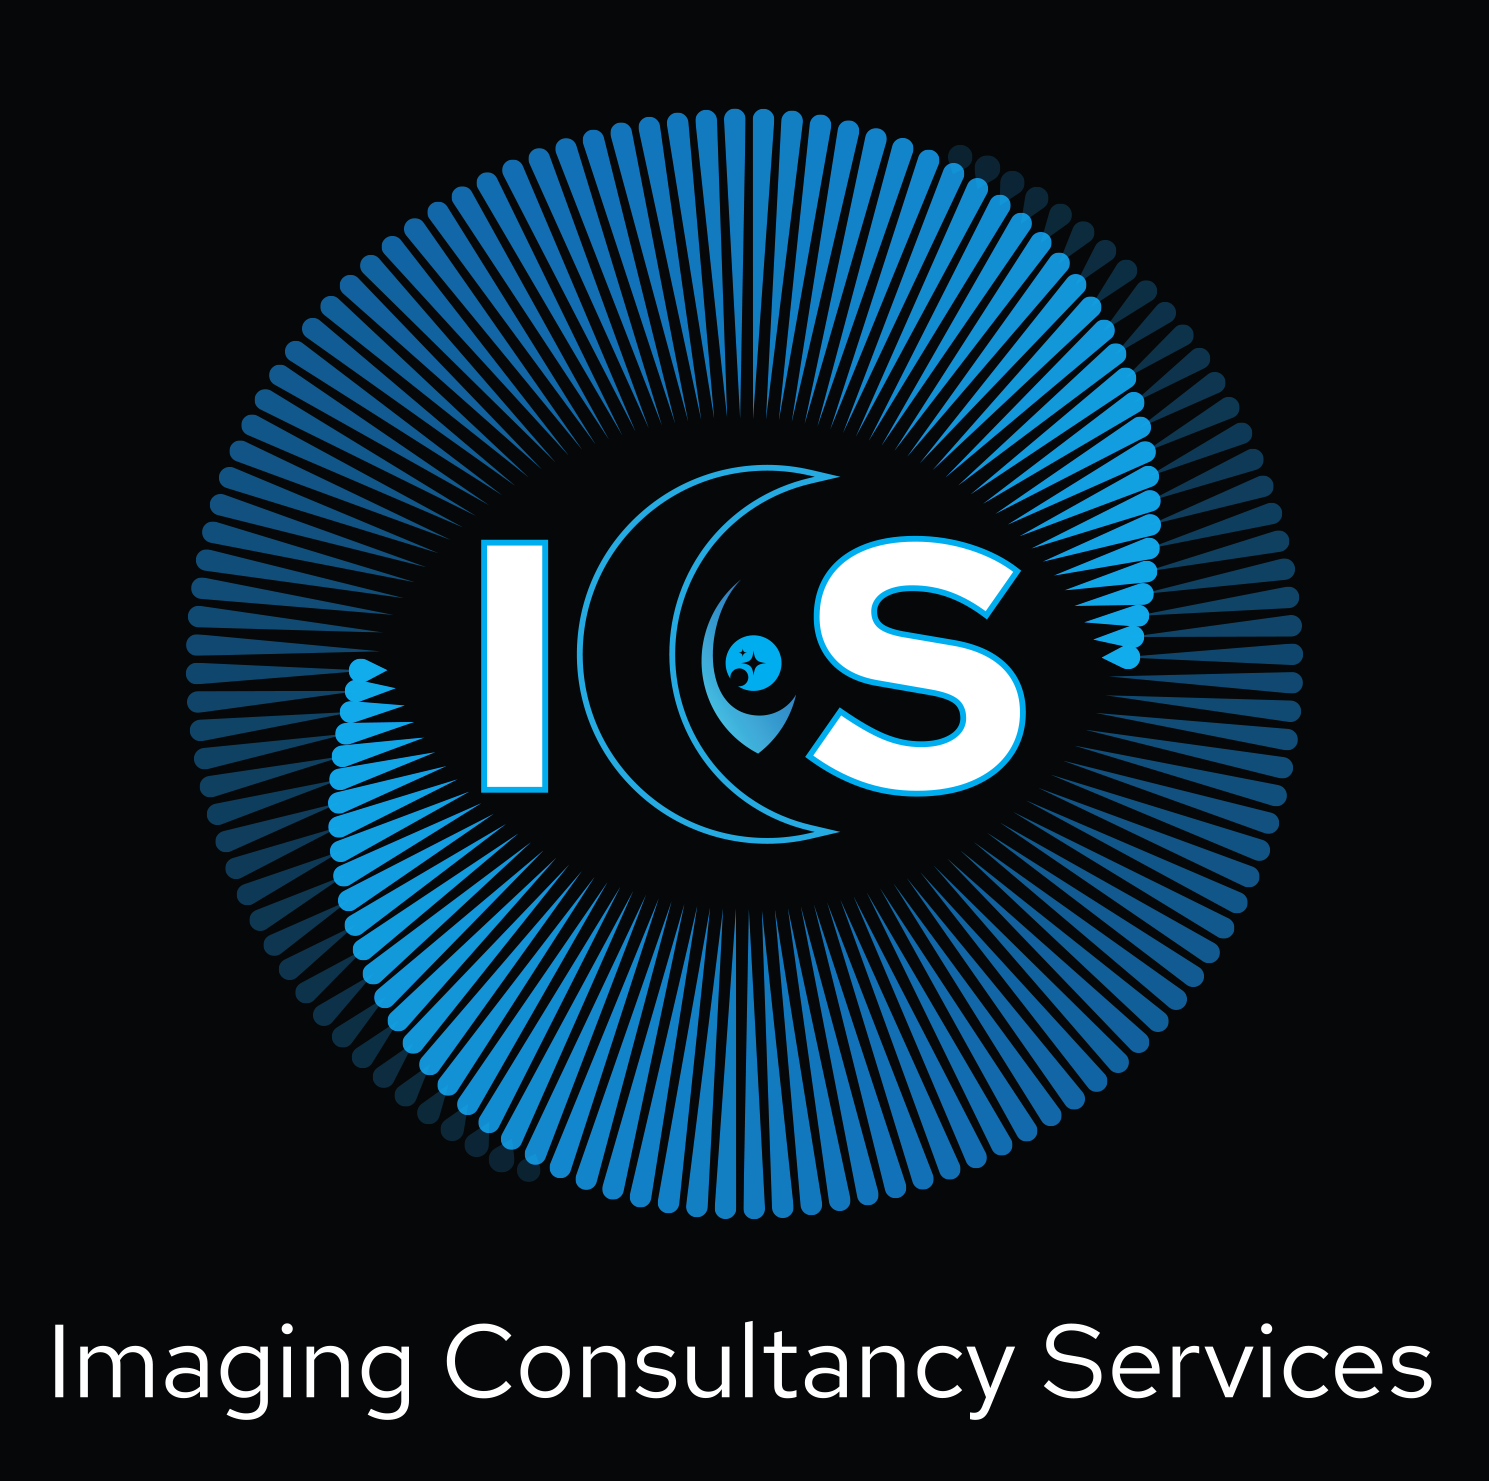 About Imaging Consultancy Services - 3D Imaging Systems Experts for UK Hospitals